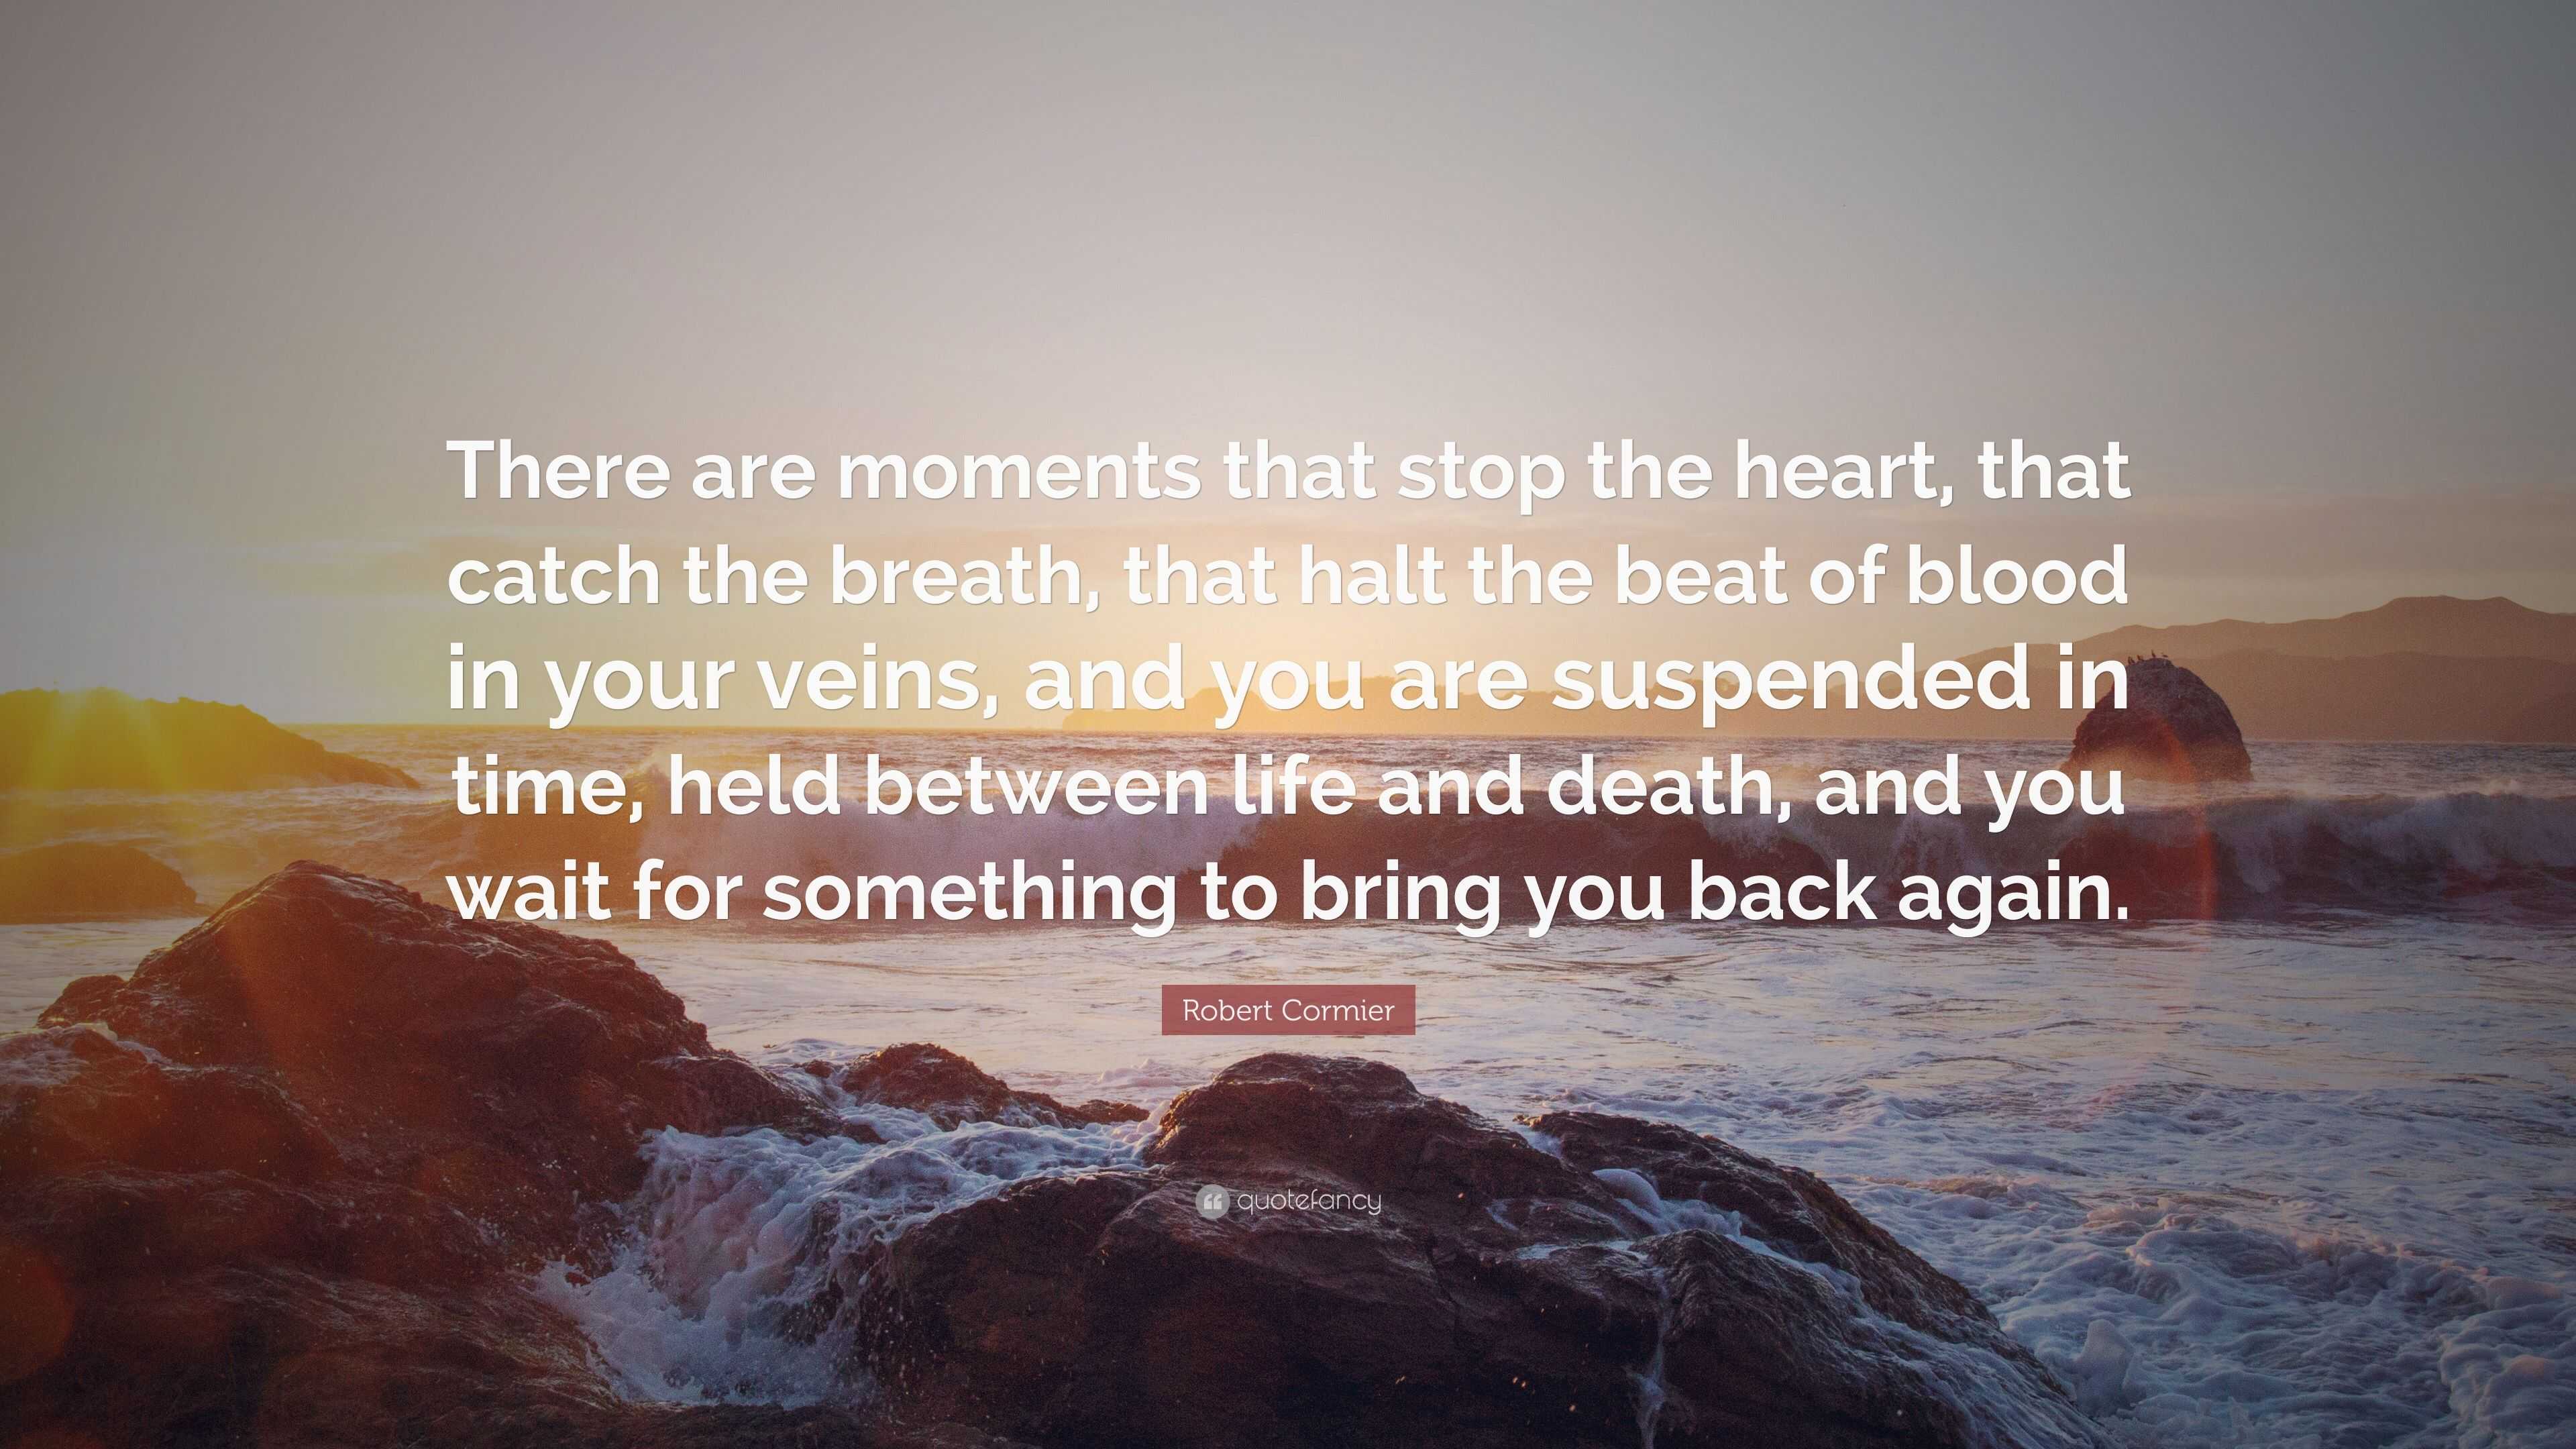 Robert Cormier Quote There Are Moments That Stop The Heart That Catch The Breath That Halt The Beat Of Blood In Your Veins And You Are Sus 7 Wallpapers Quotefancy